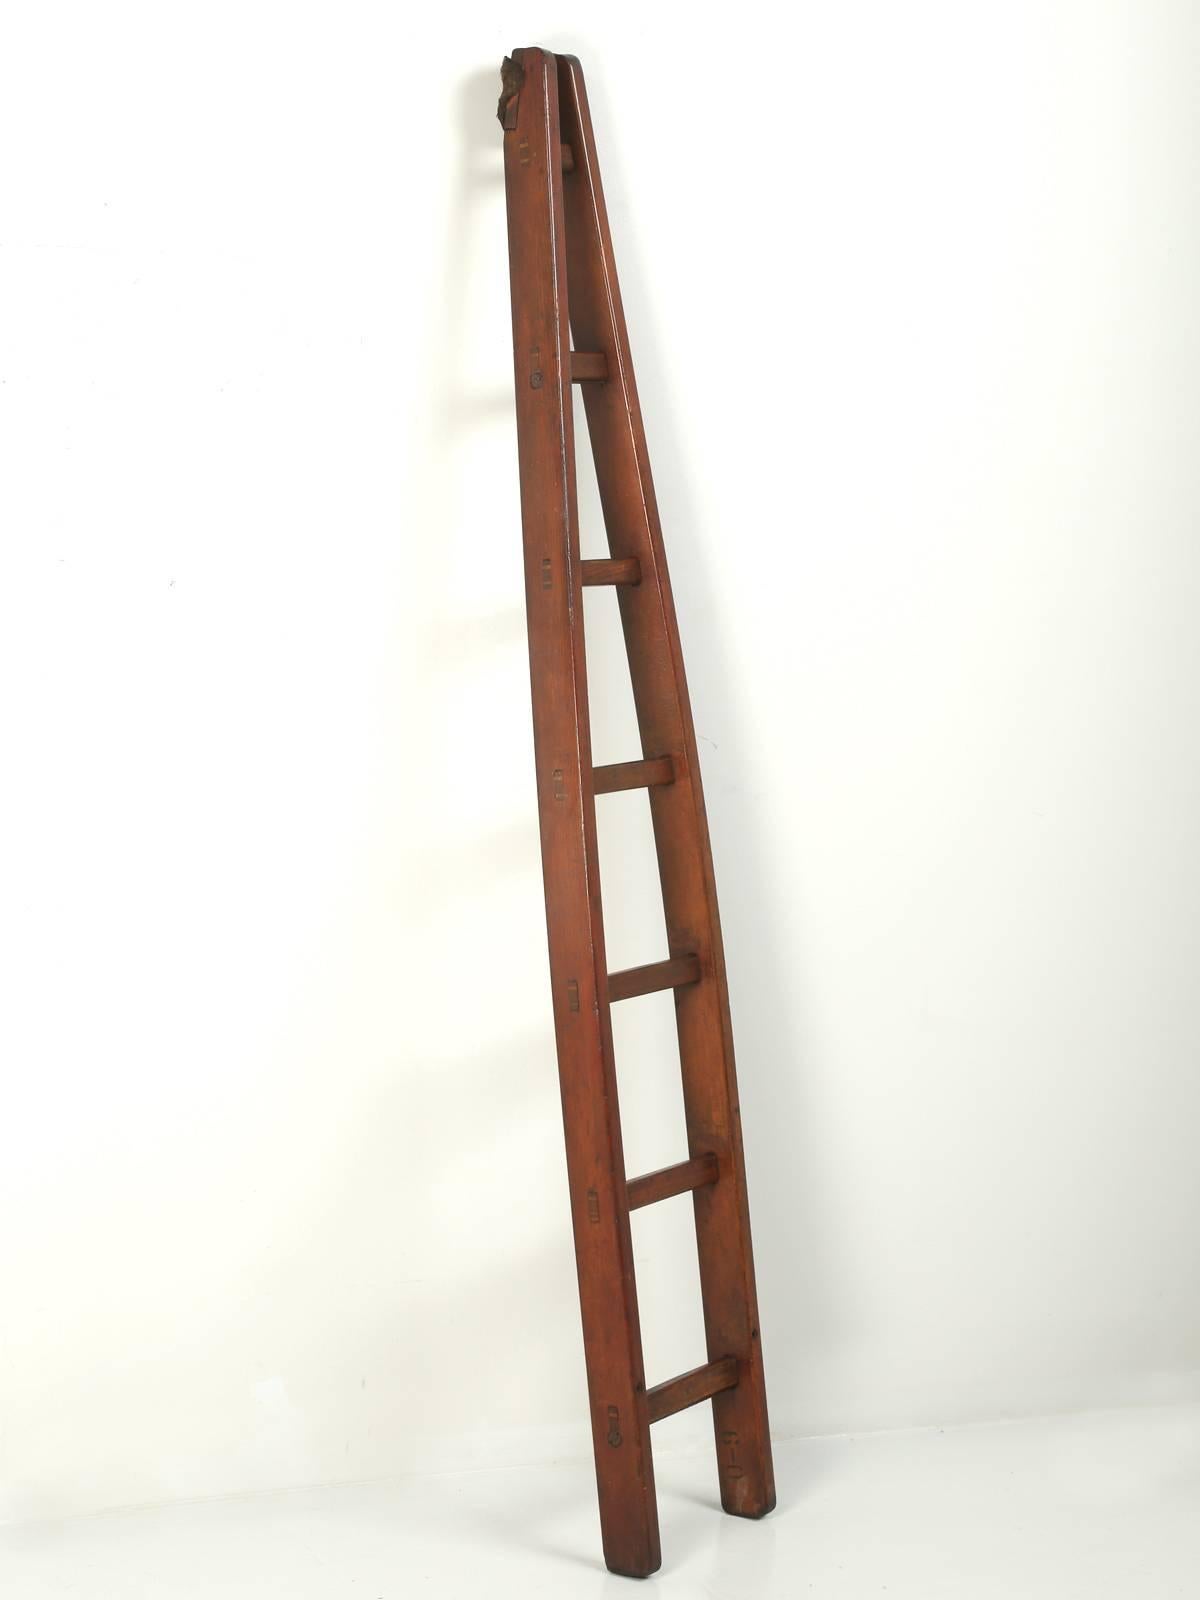 One of the 1stdibs viewers was kind enough to enlighten (pun intended) us, as to what this ladder was used for; “This is a 